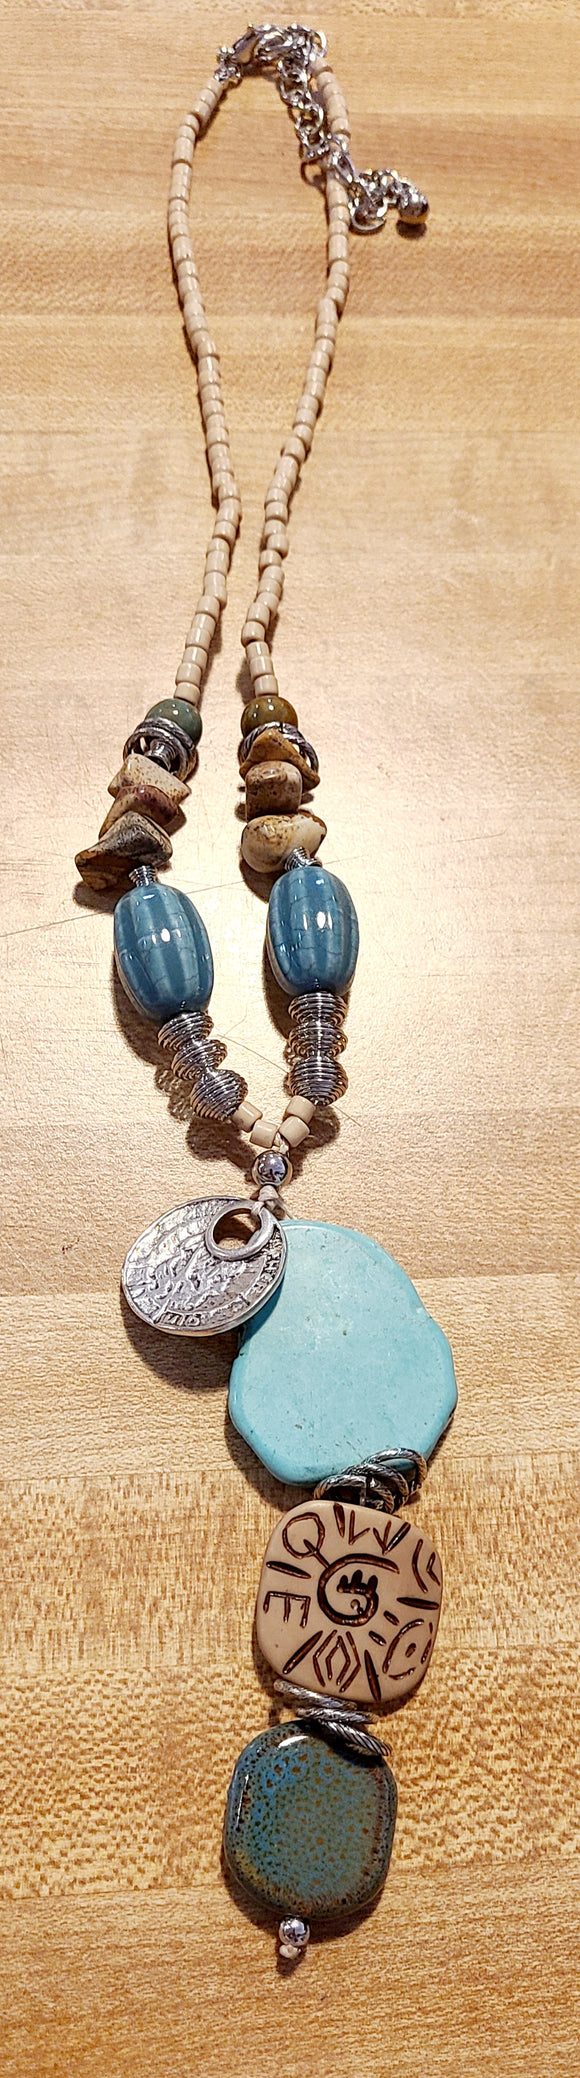 turquoise stone and bead necklace